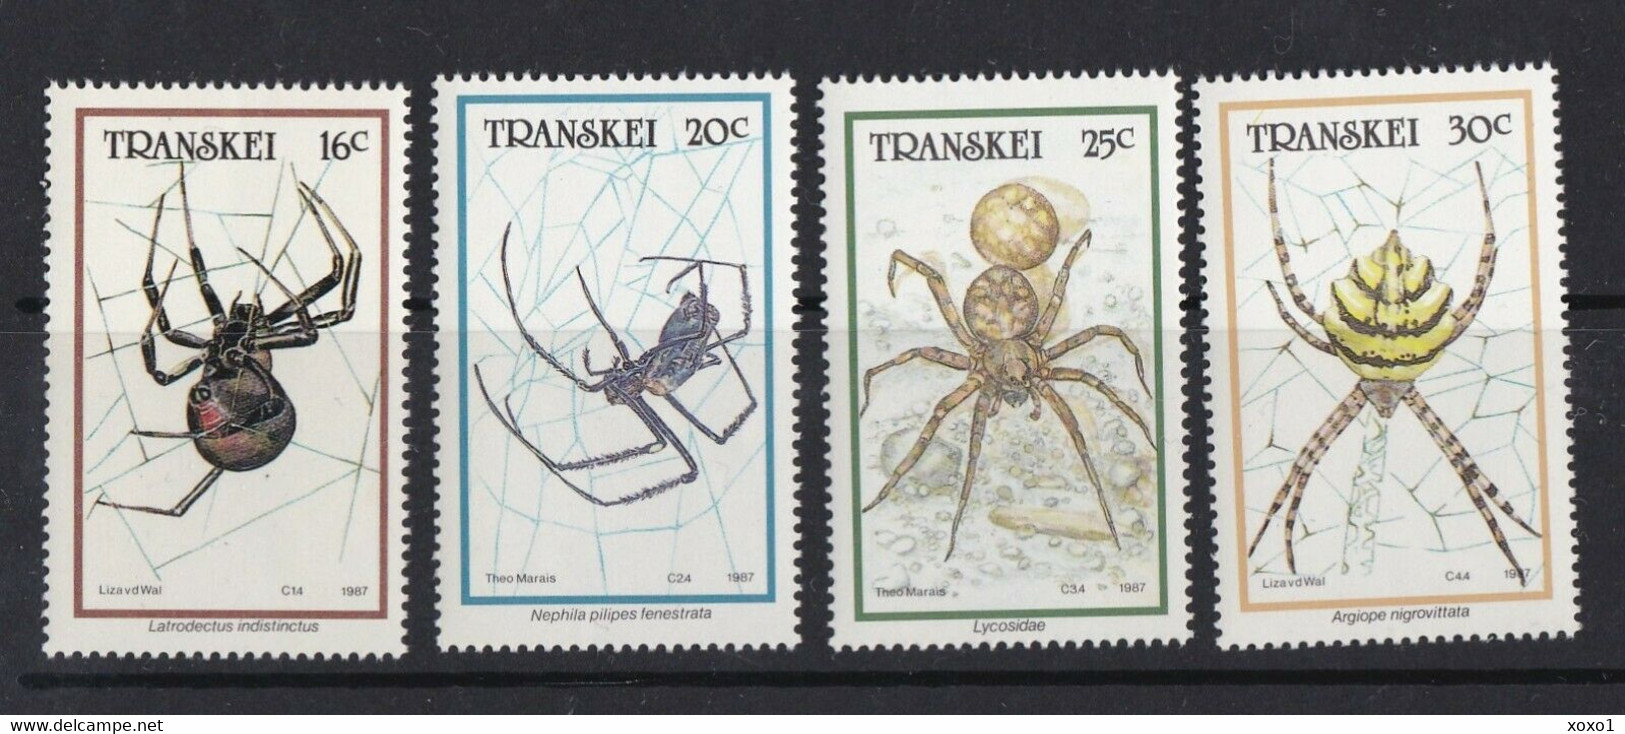 Transkei South Africa 1987  MiNr. 206 - 209 Spiders Insects 4v MNH**  3,50 € - Spinnen